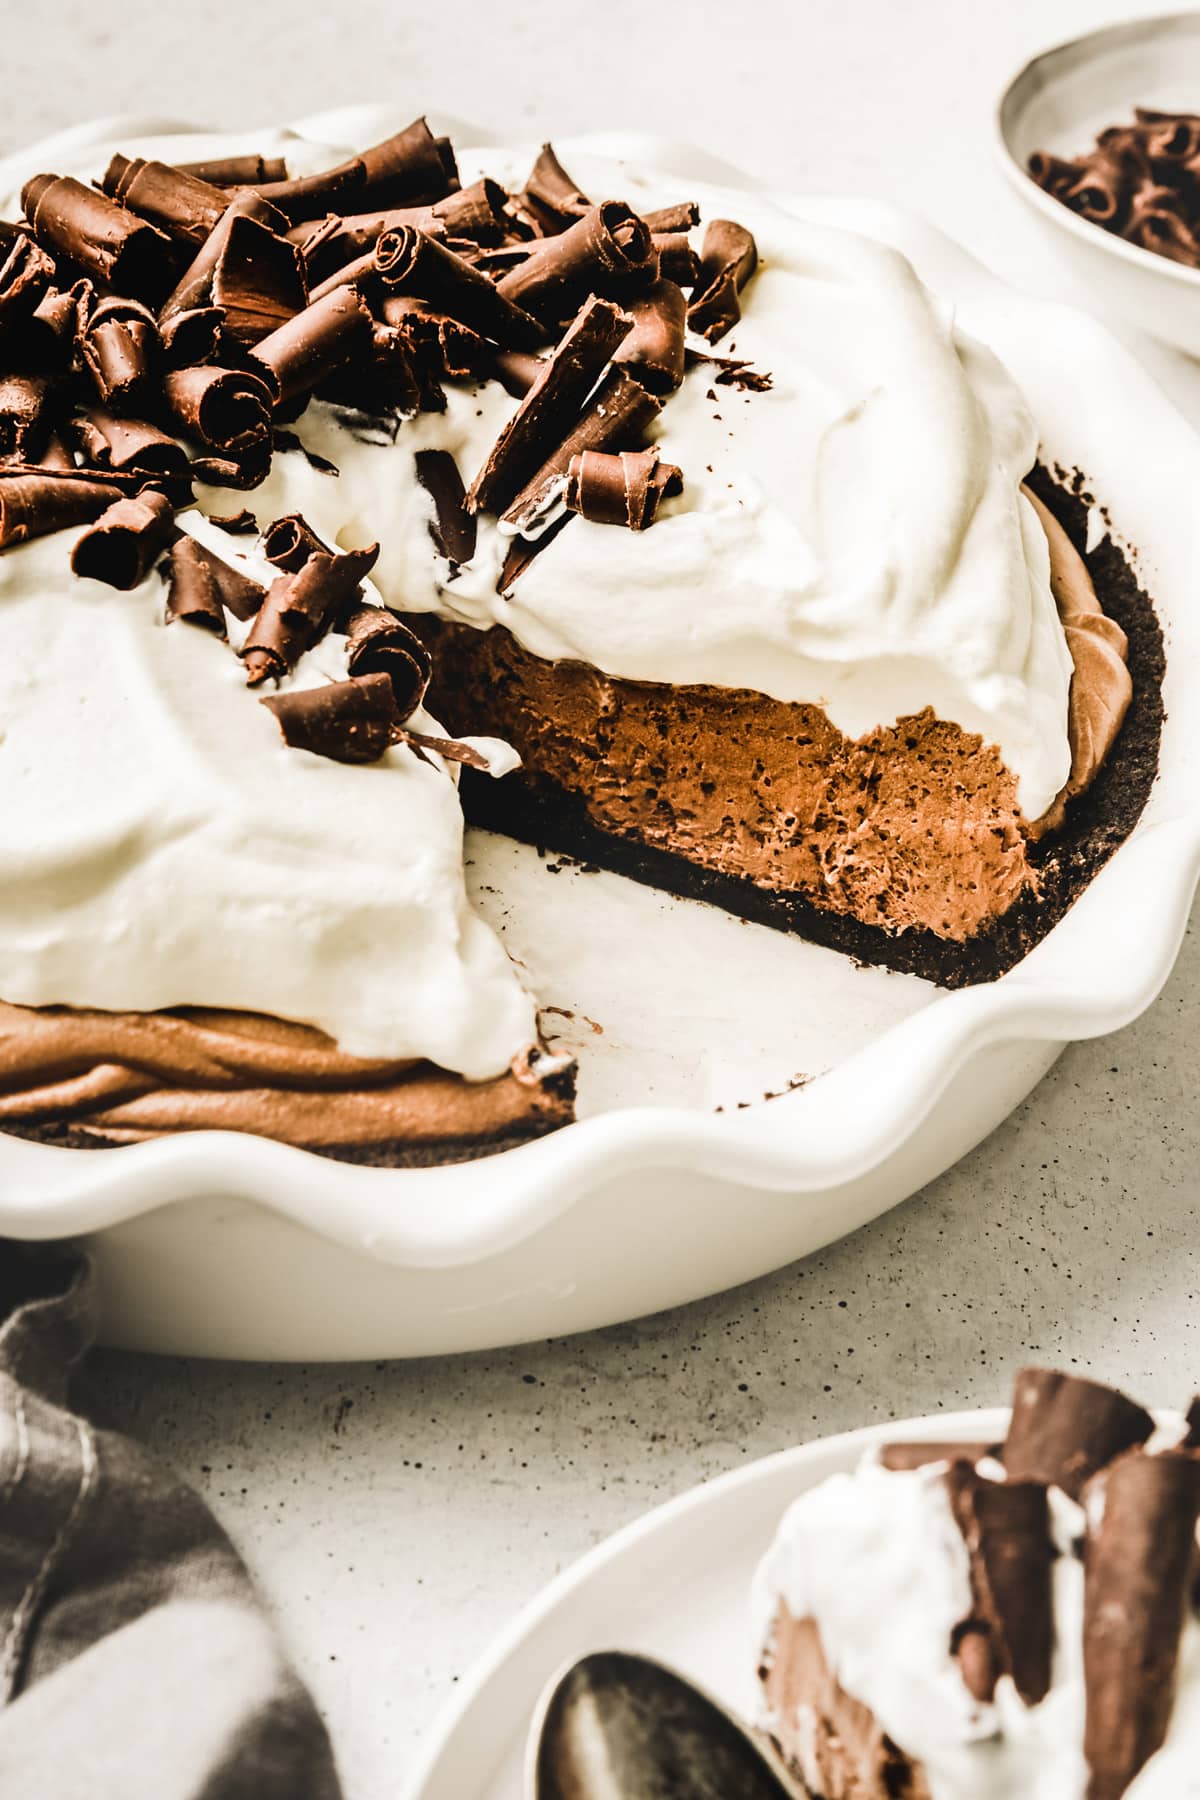 Chocolate mousse with whipped cream recipe